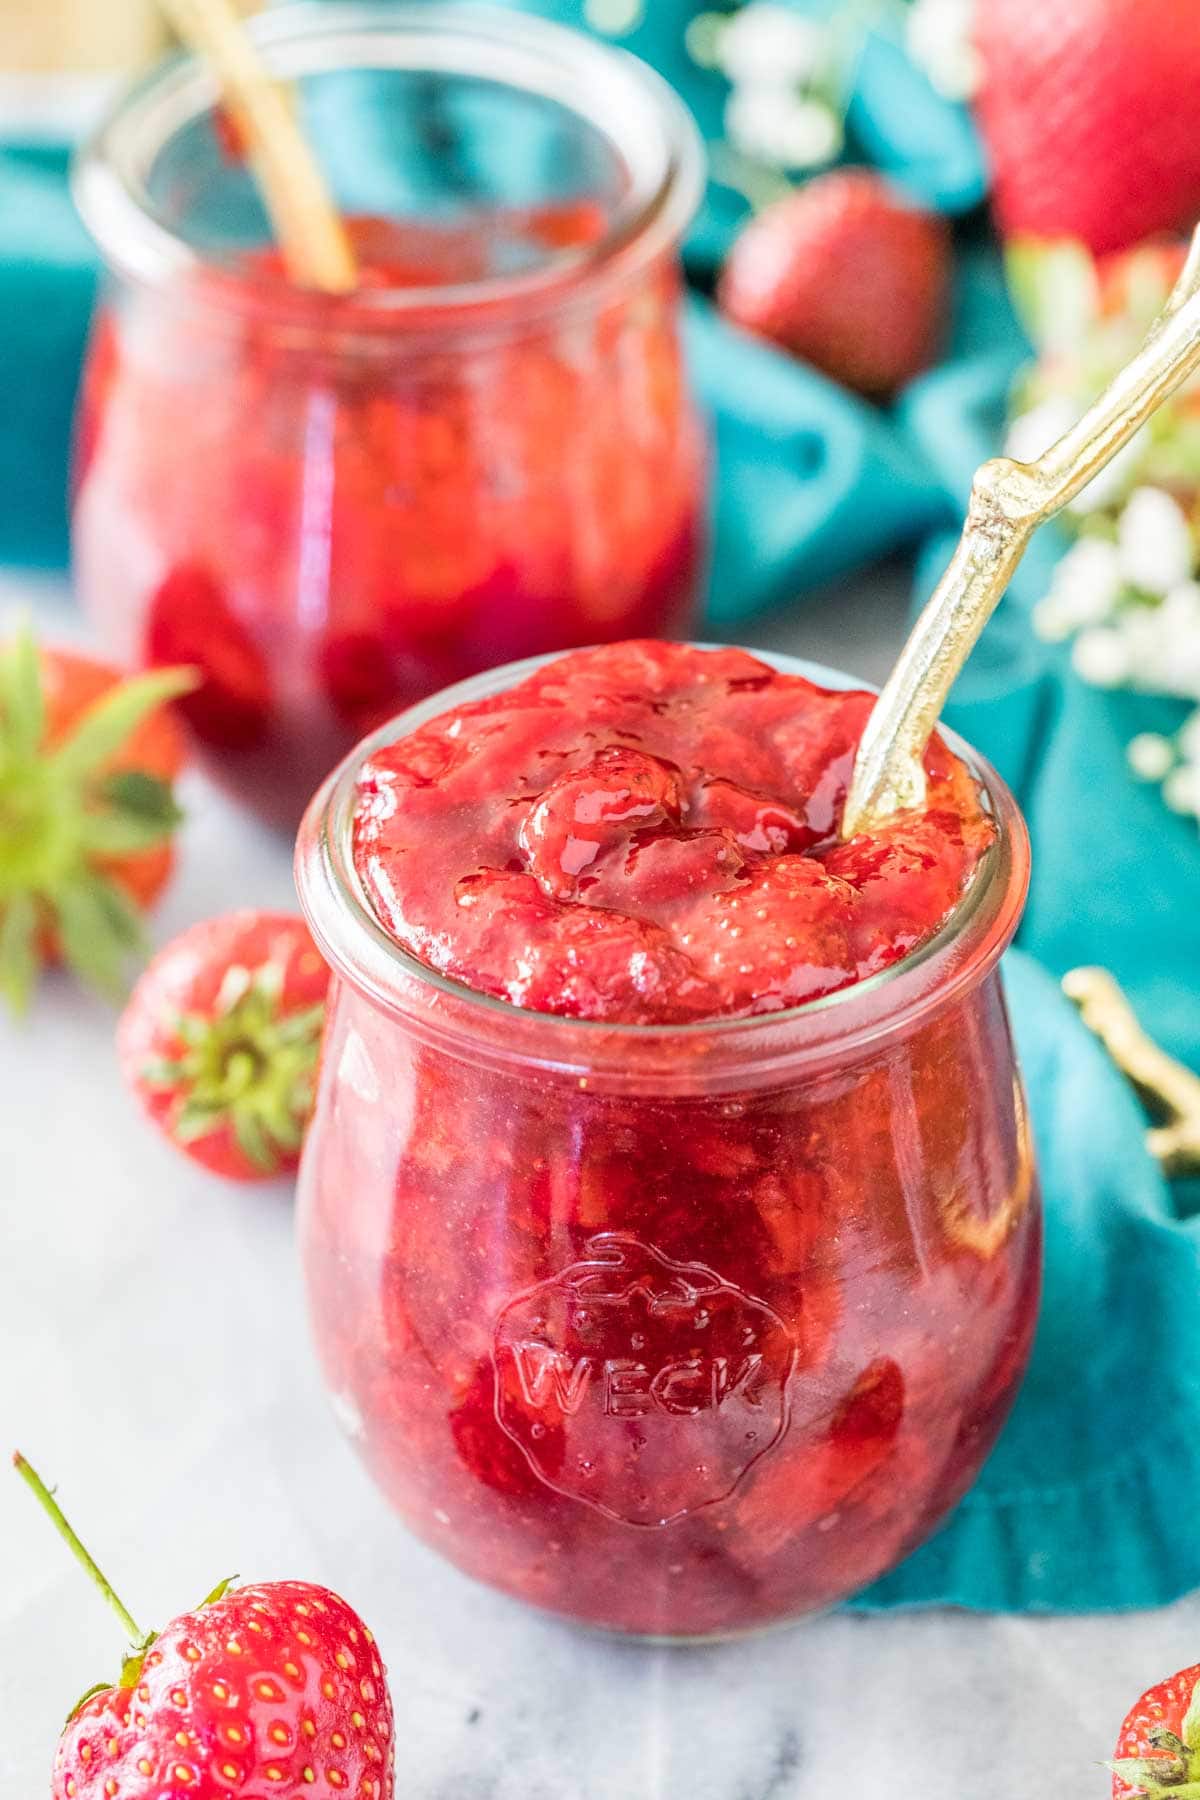 Jar of homemade strawberry sauce with a gold spoon sticking out of it.